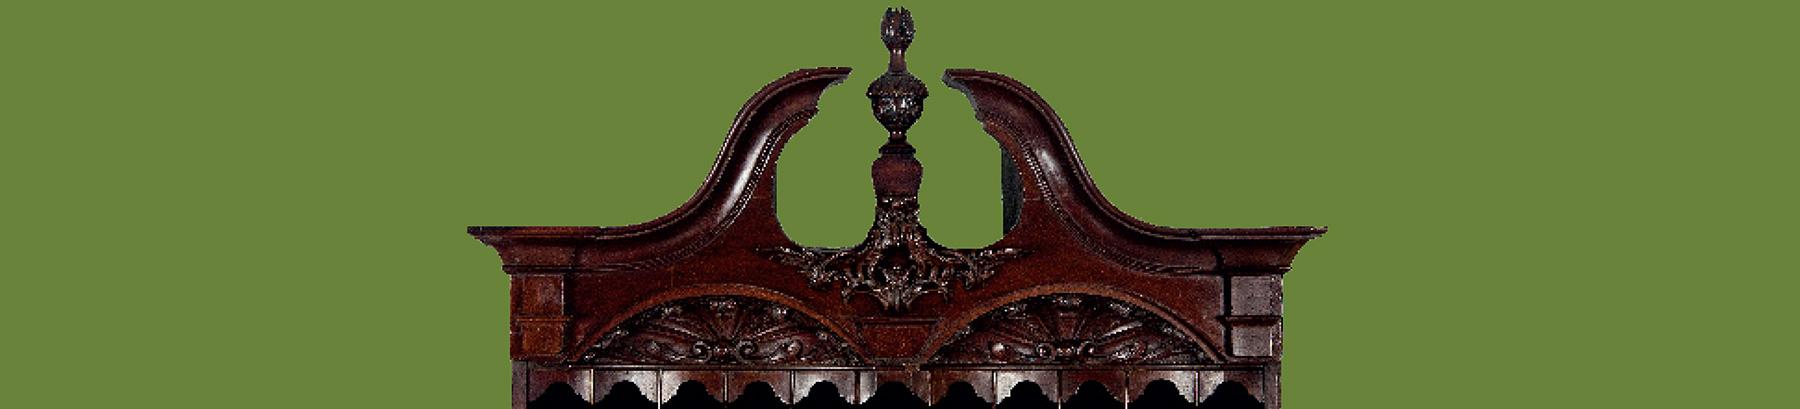 Cabinetmaker_header-for-exhibition-page.jpg